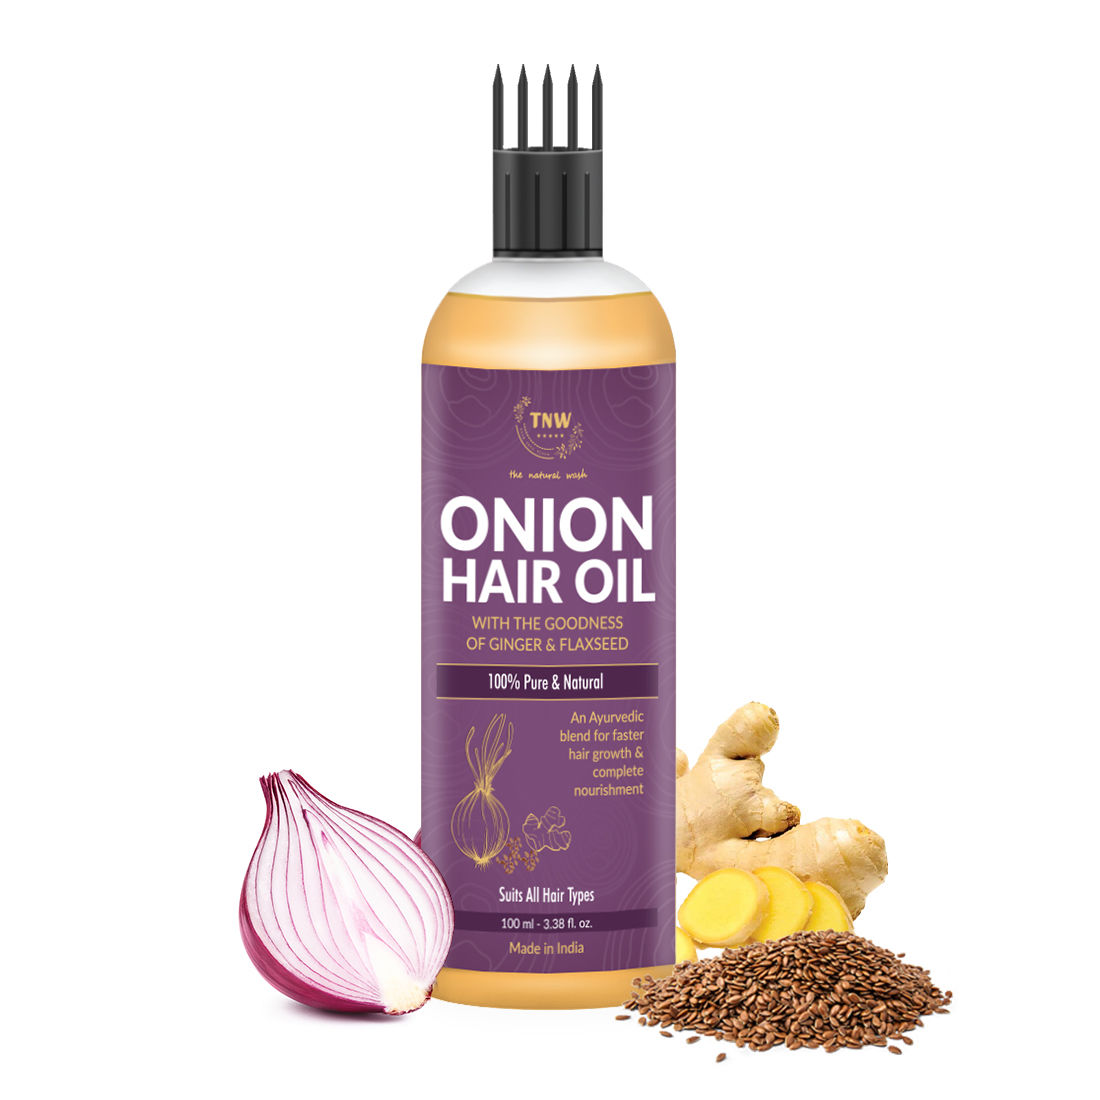 TNW The Natural Wash Onion Hair Oil for Hair Growth & Reduce Hair Fall with Comb Applicator